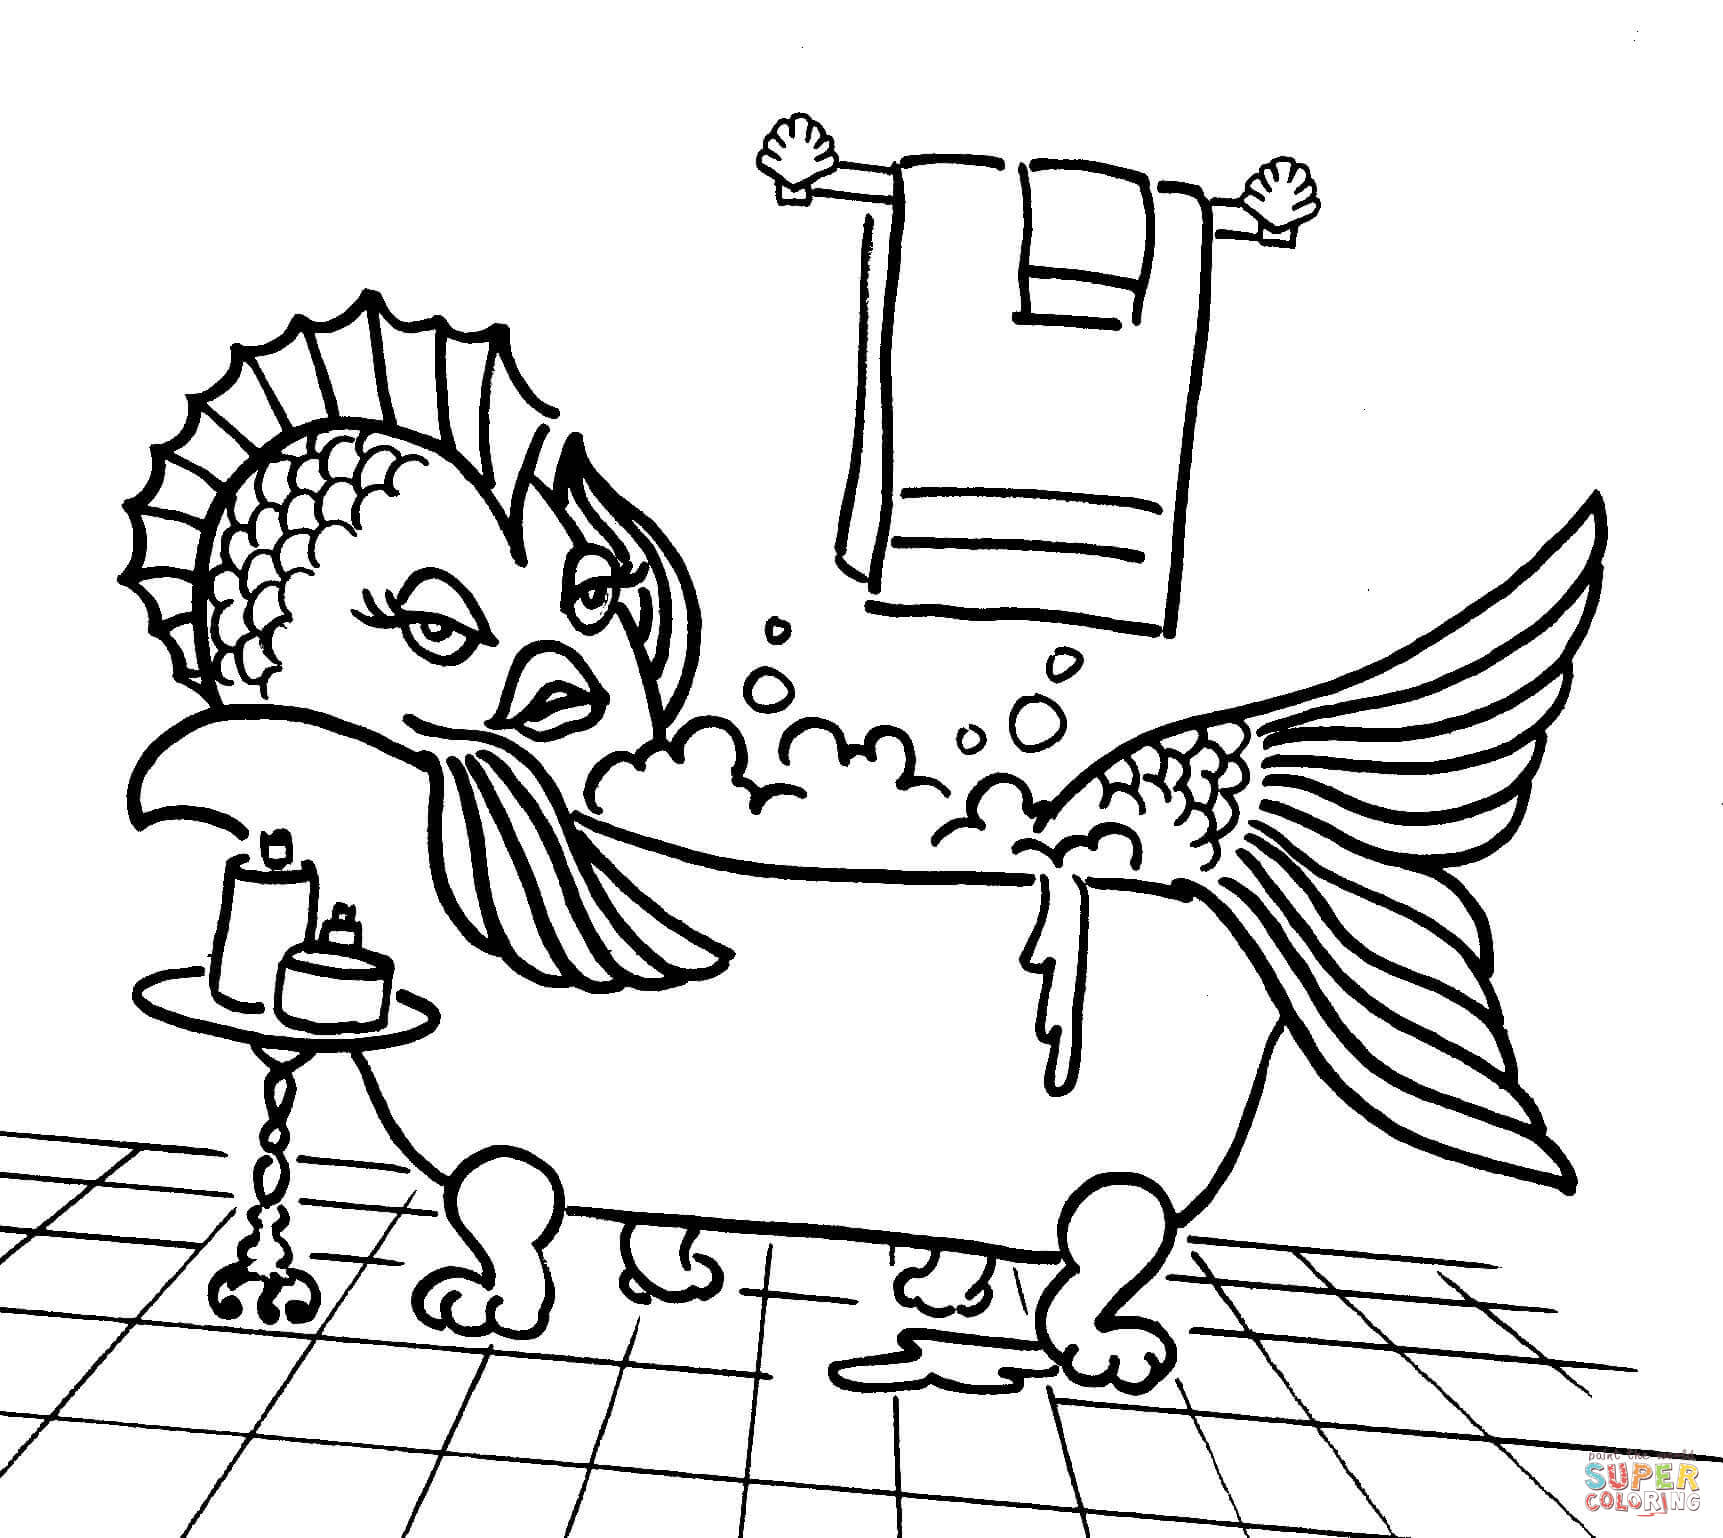 Fish coloring pages | Free Coloring Pages